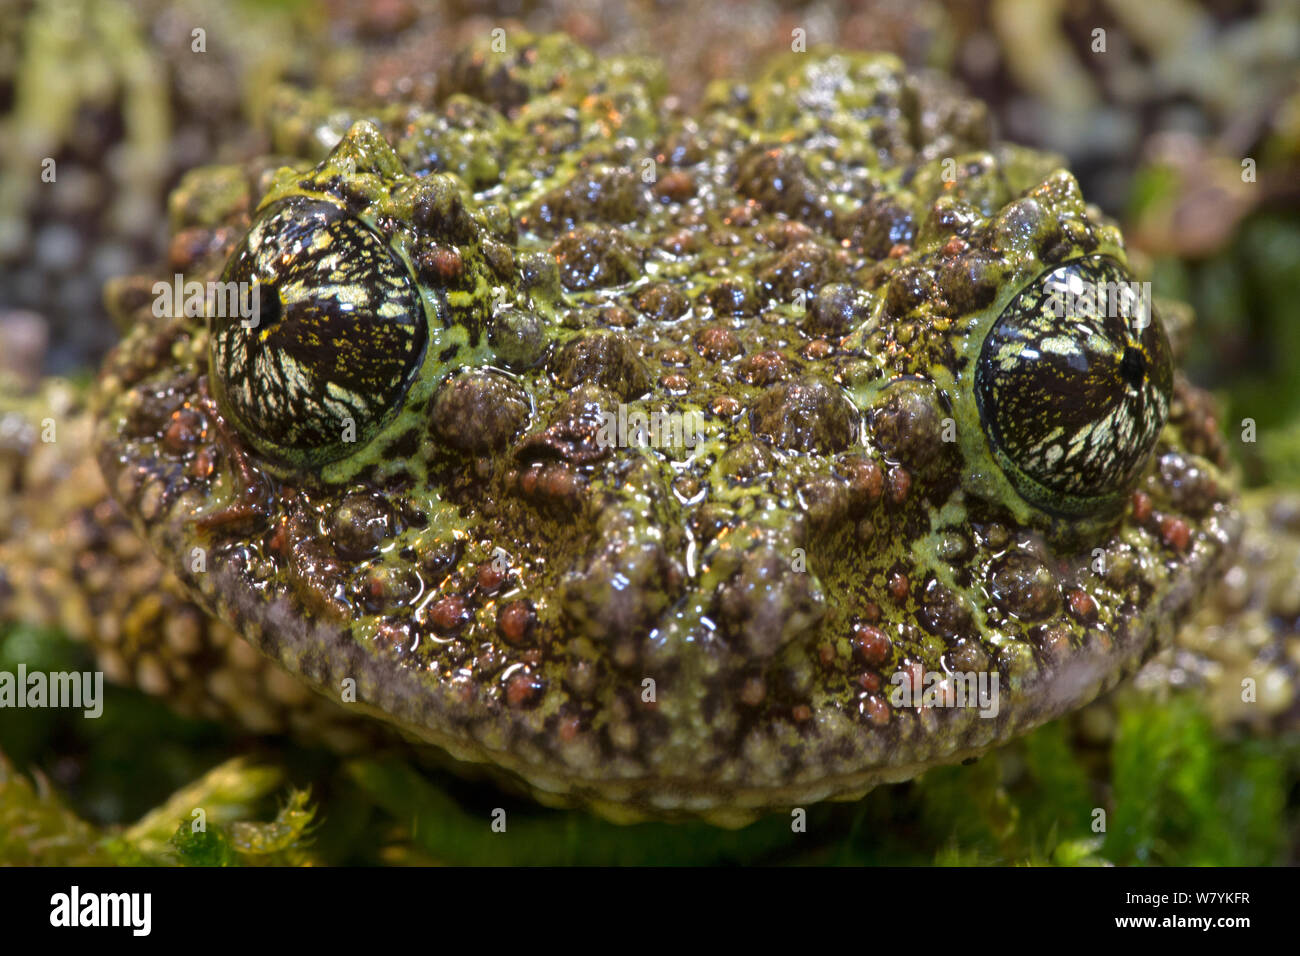 Vietnamese Moss Frog (Theloderma corticale) Captive. Native to